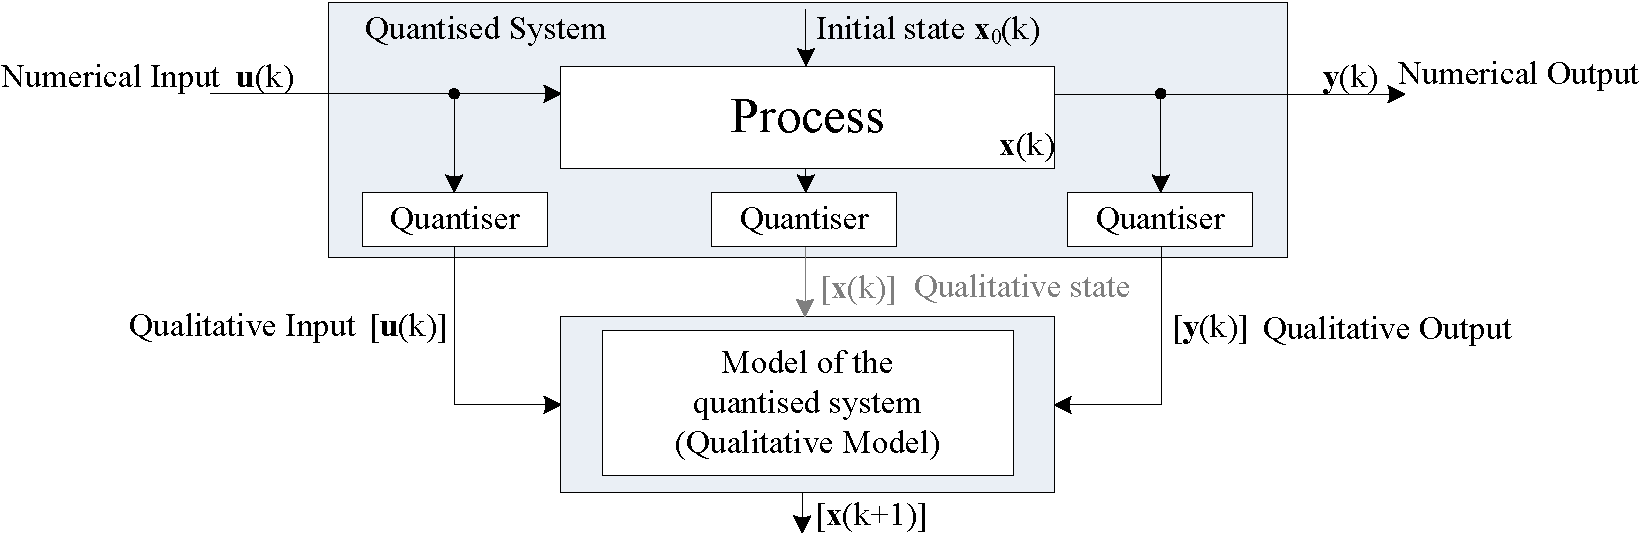 _images/Act_2_3_Quant_Sys2.png